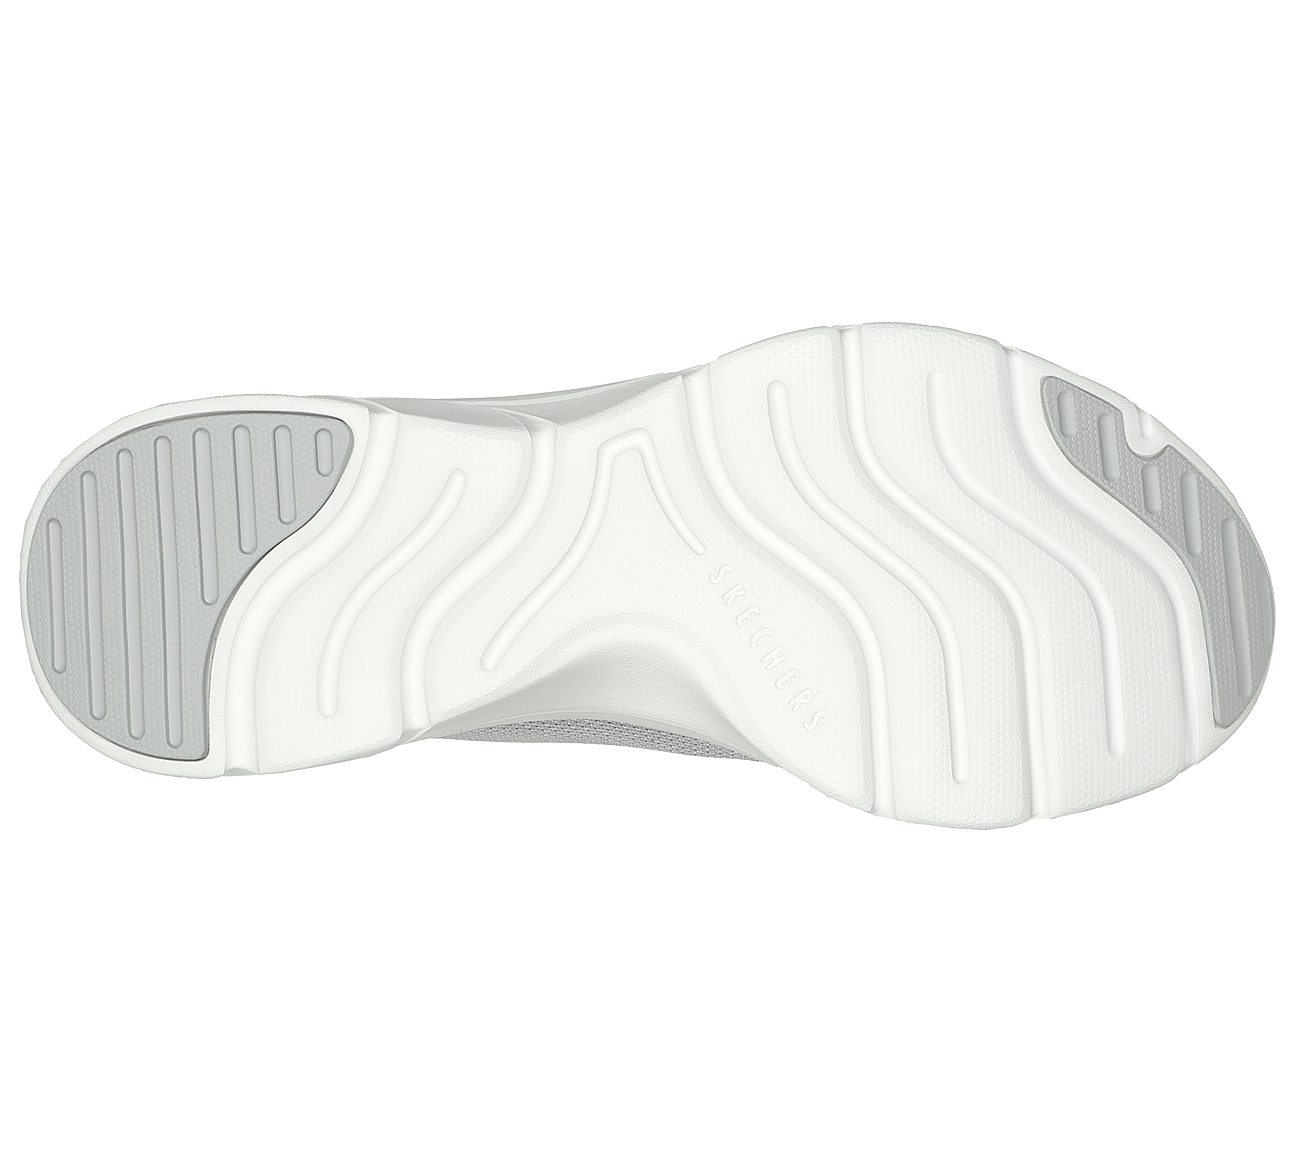 D'LUX COMFORT - BLISS GALORE, GREY/CORAL Footwear Bottom View